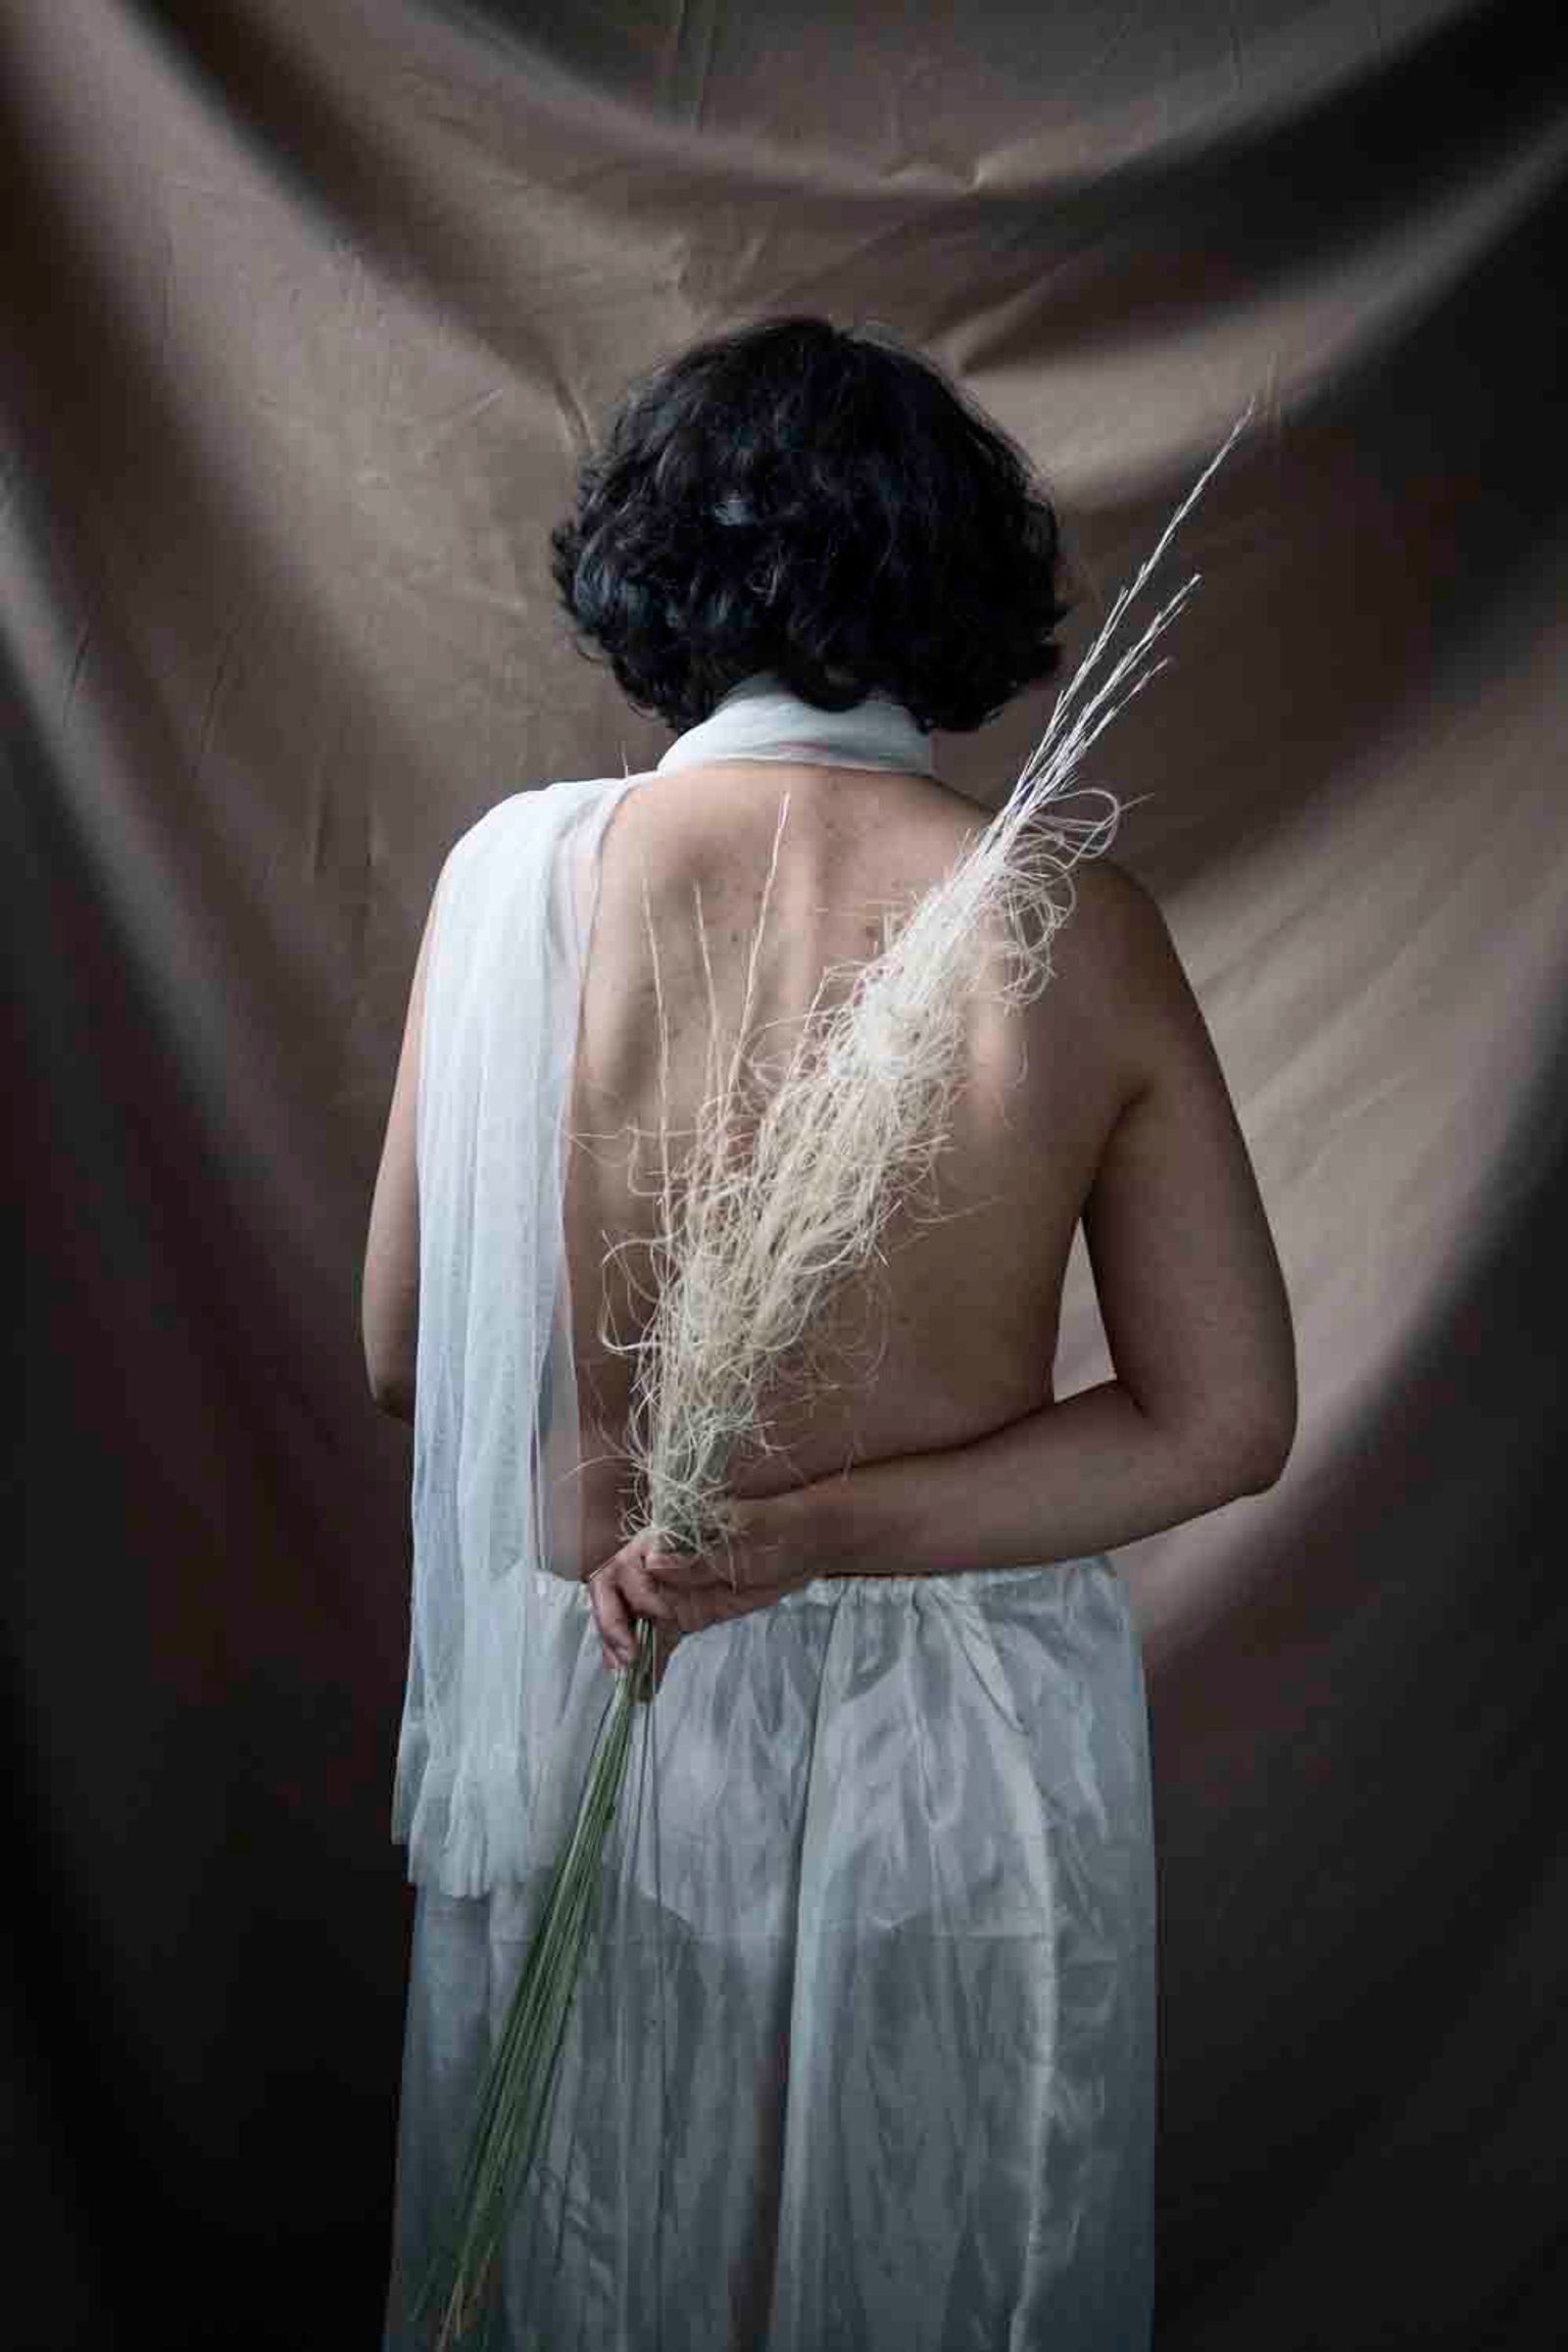 © sima choubdarzadeh - Image from the My name is fear photography project